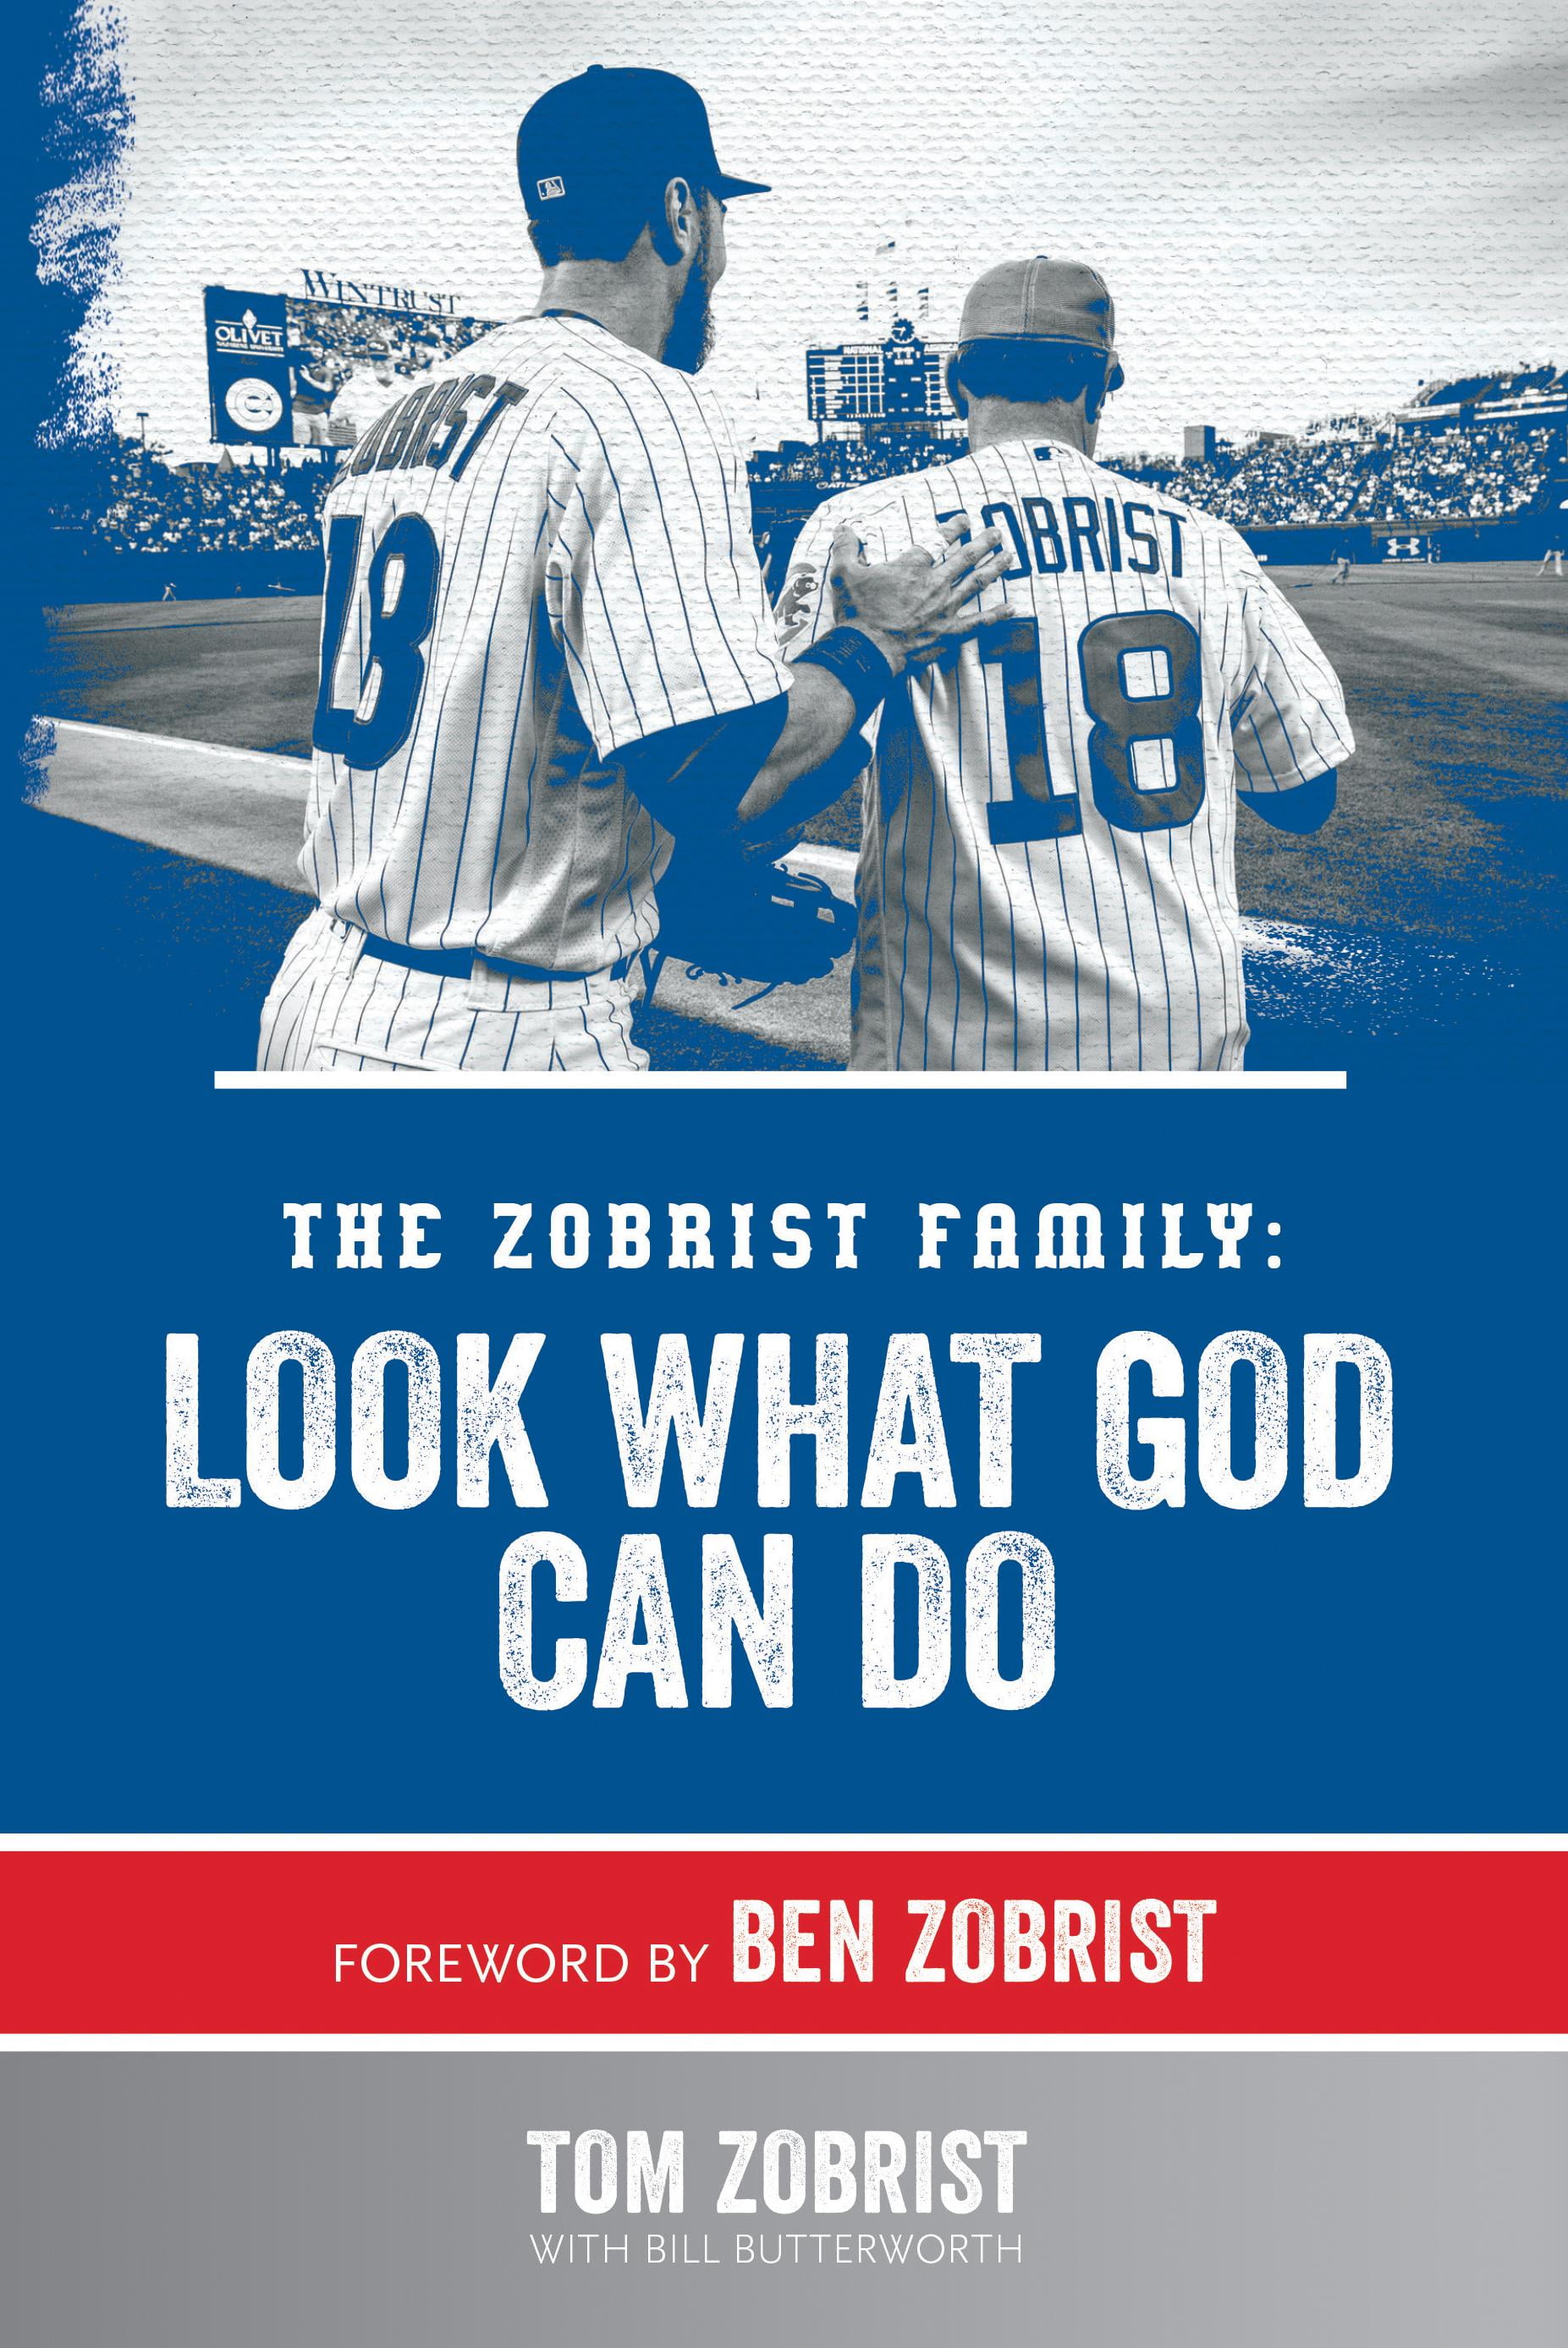 The Zobrist Family Look What God Can Do